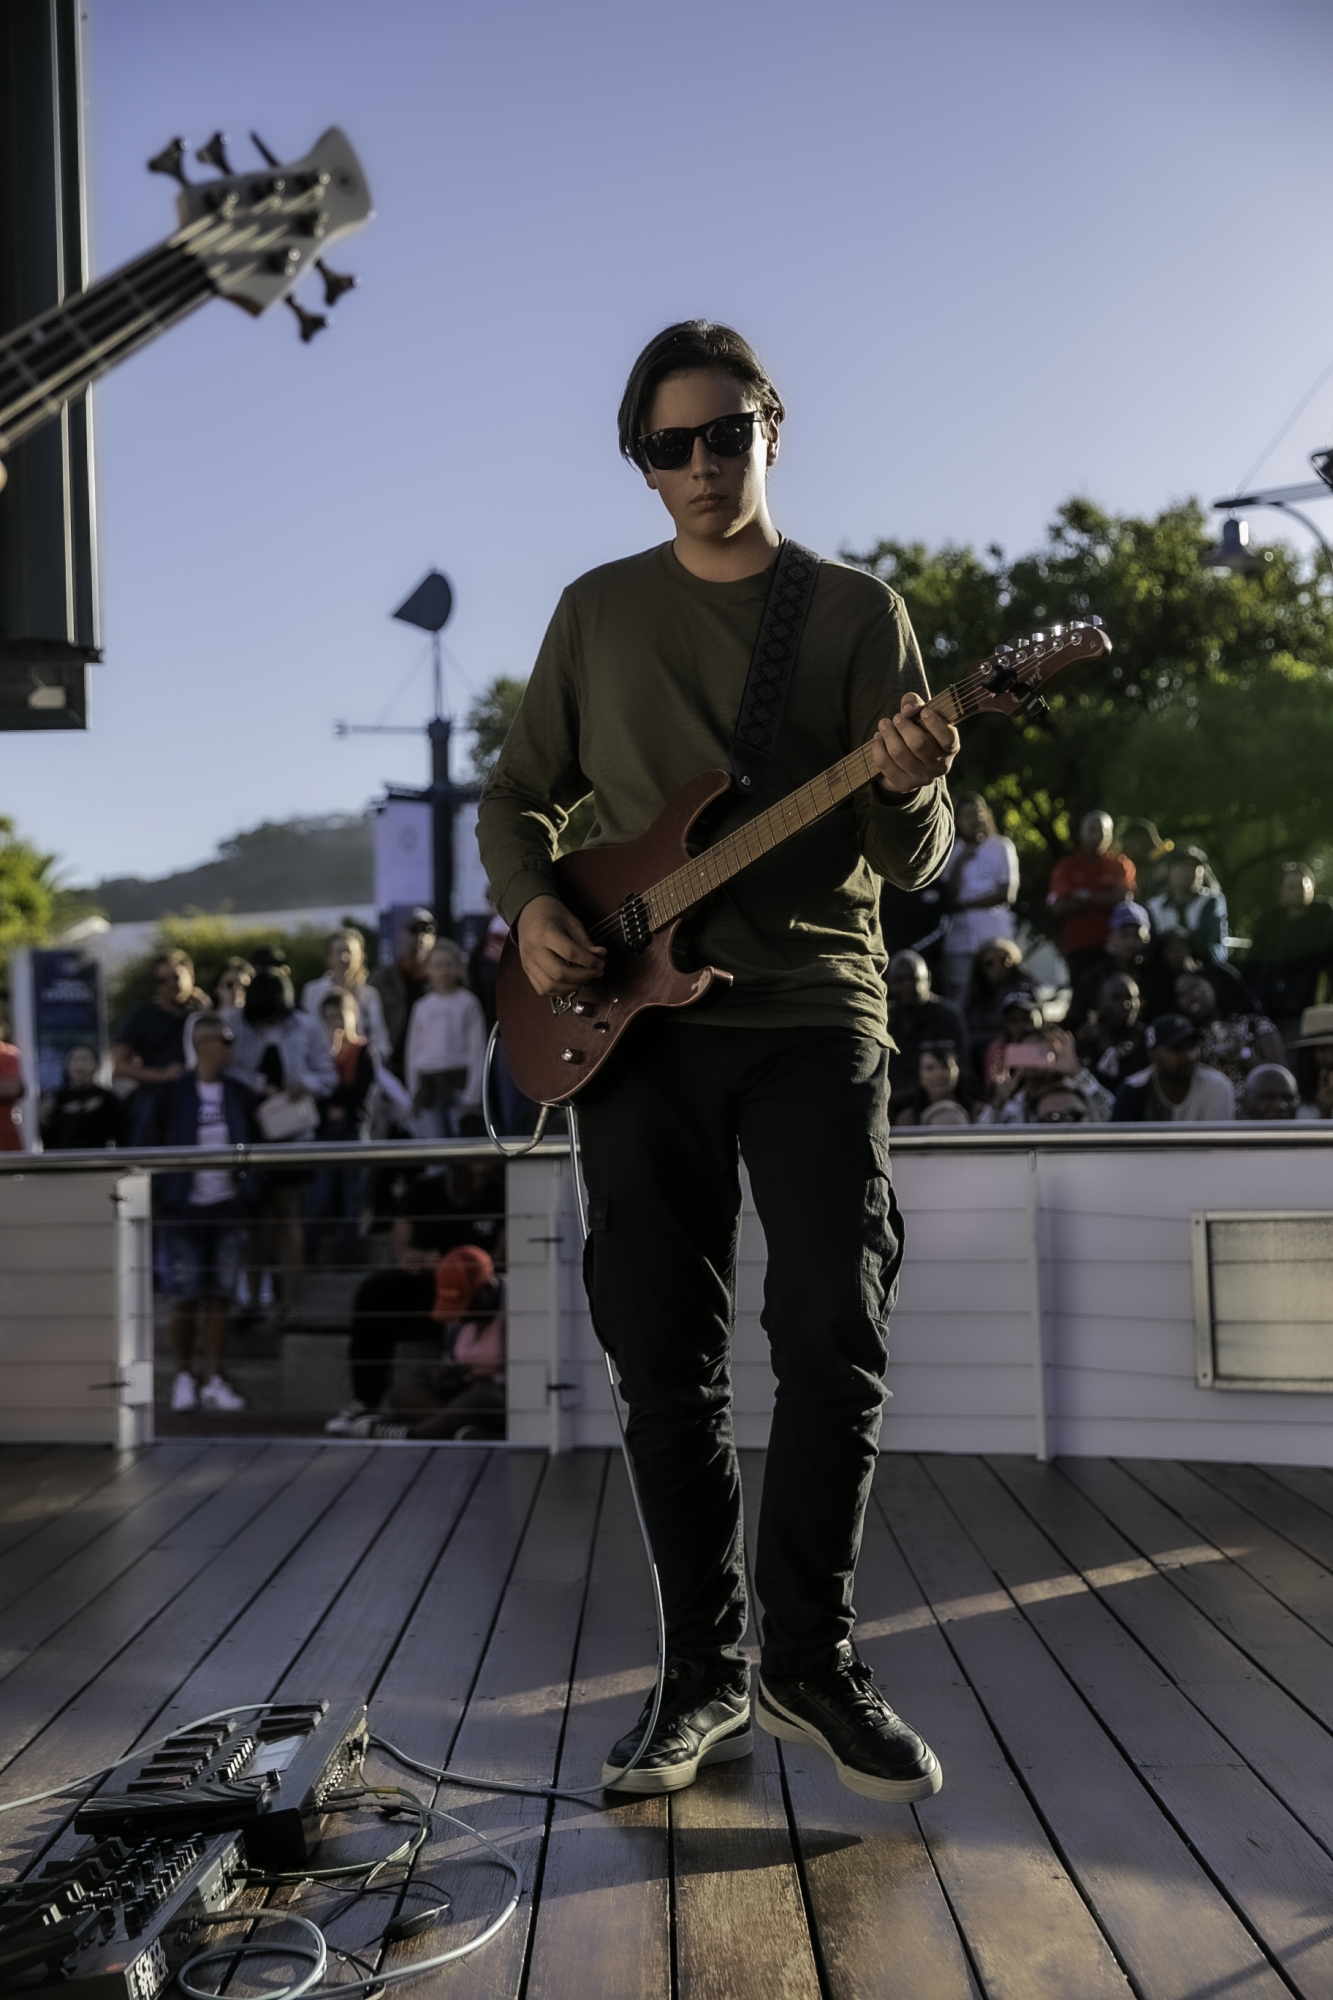 House Band guitarist performing at V&A Waterfront Amphitheatre March 2023